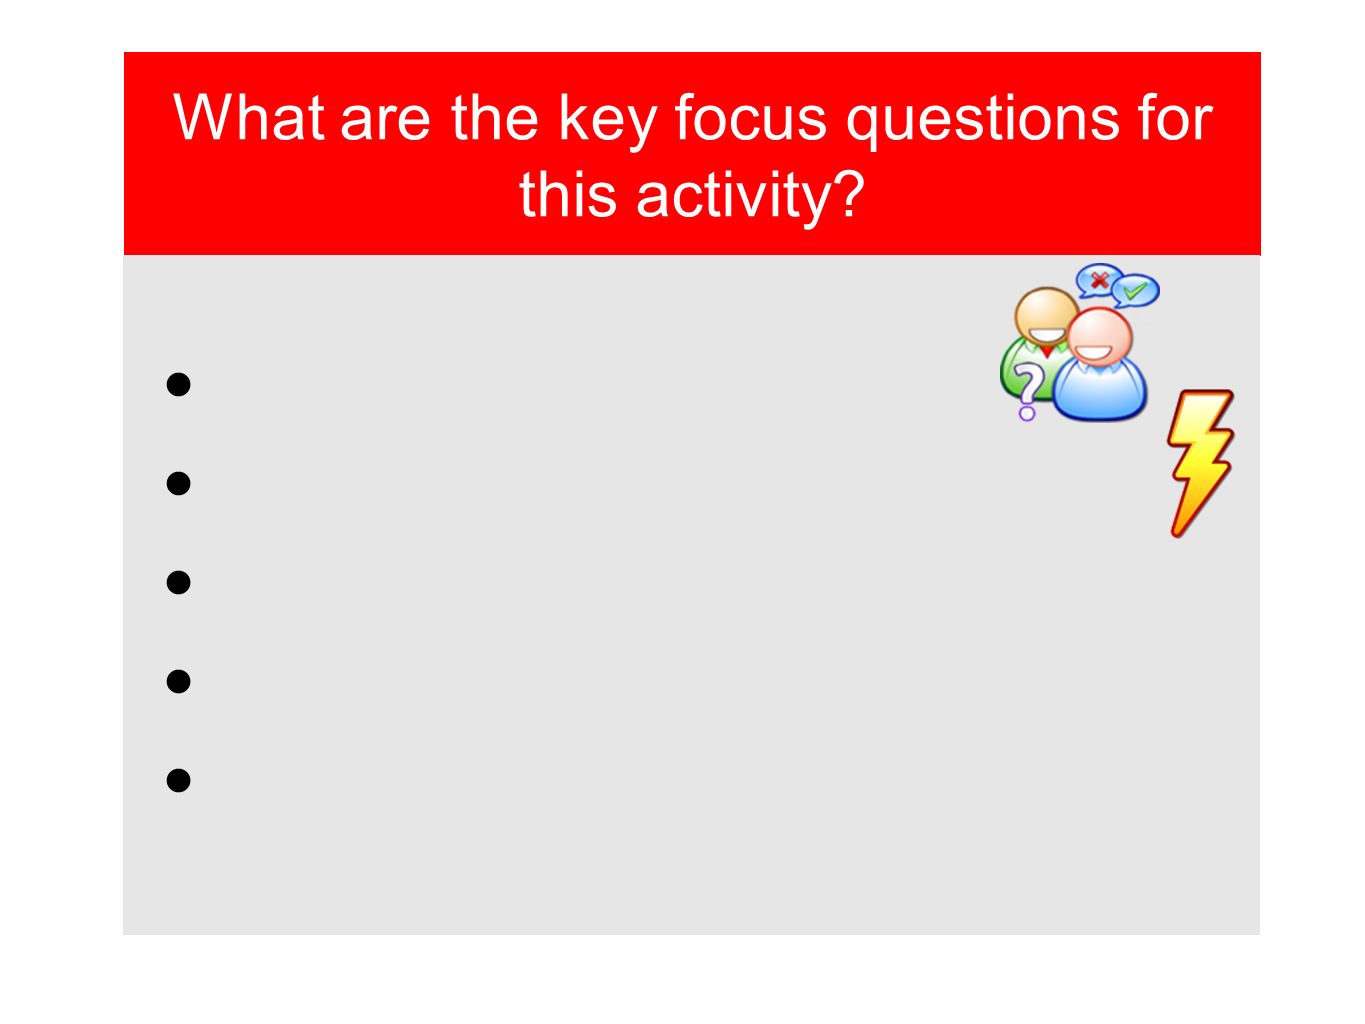 What are the key focus questions for this activity